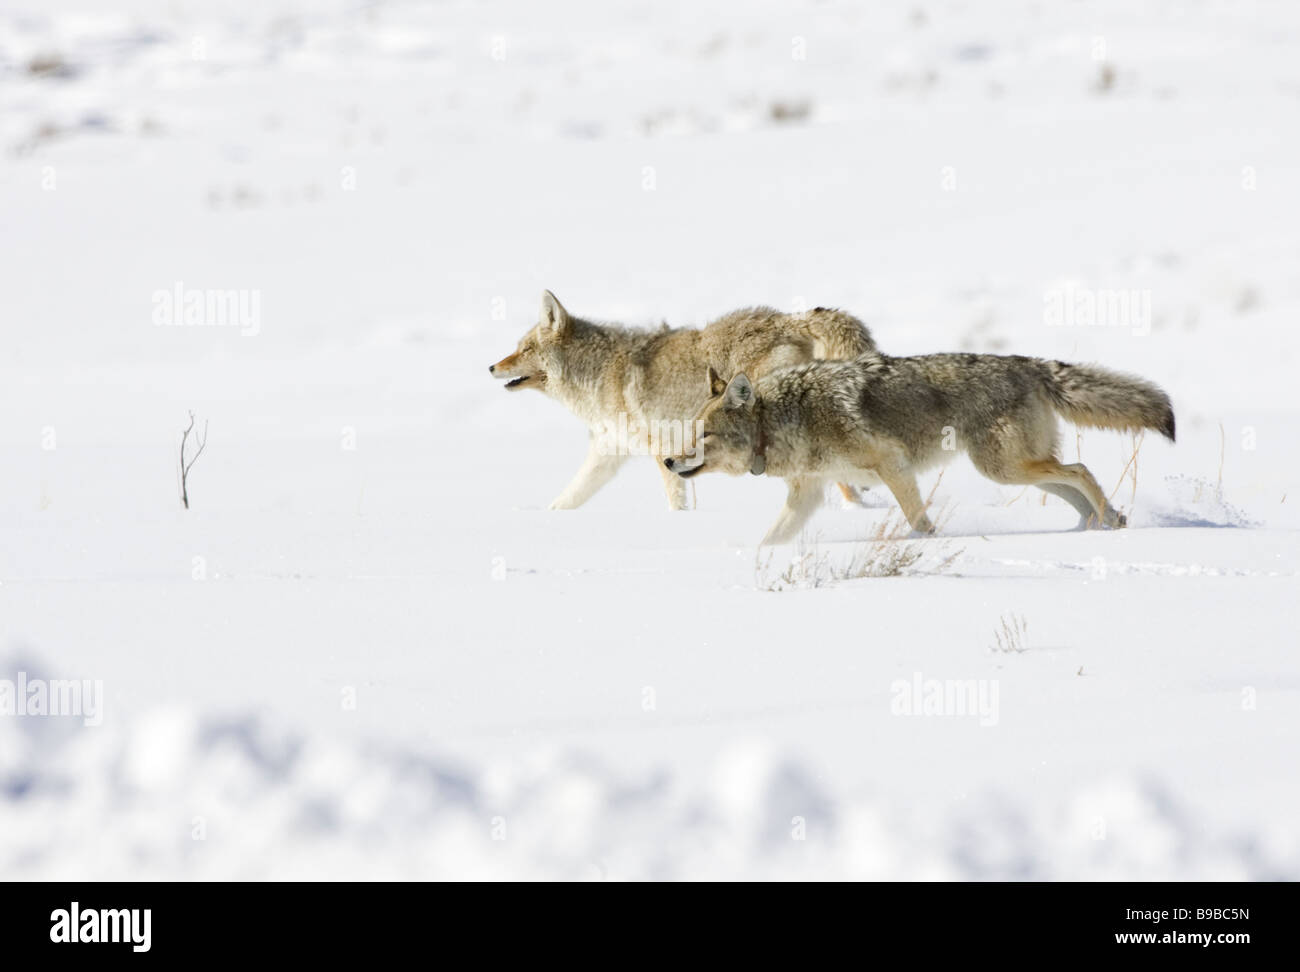 Two Coyotes One with a Tracking Collar Canis latrans Stock Photo